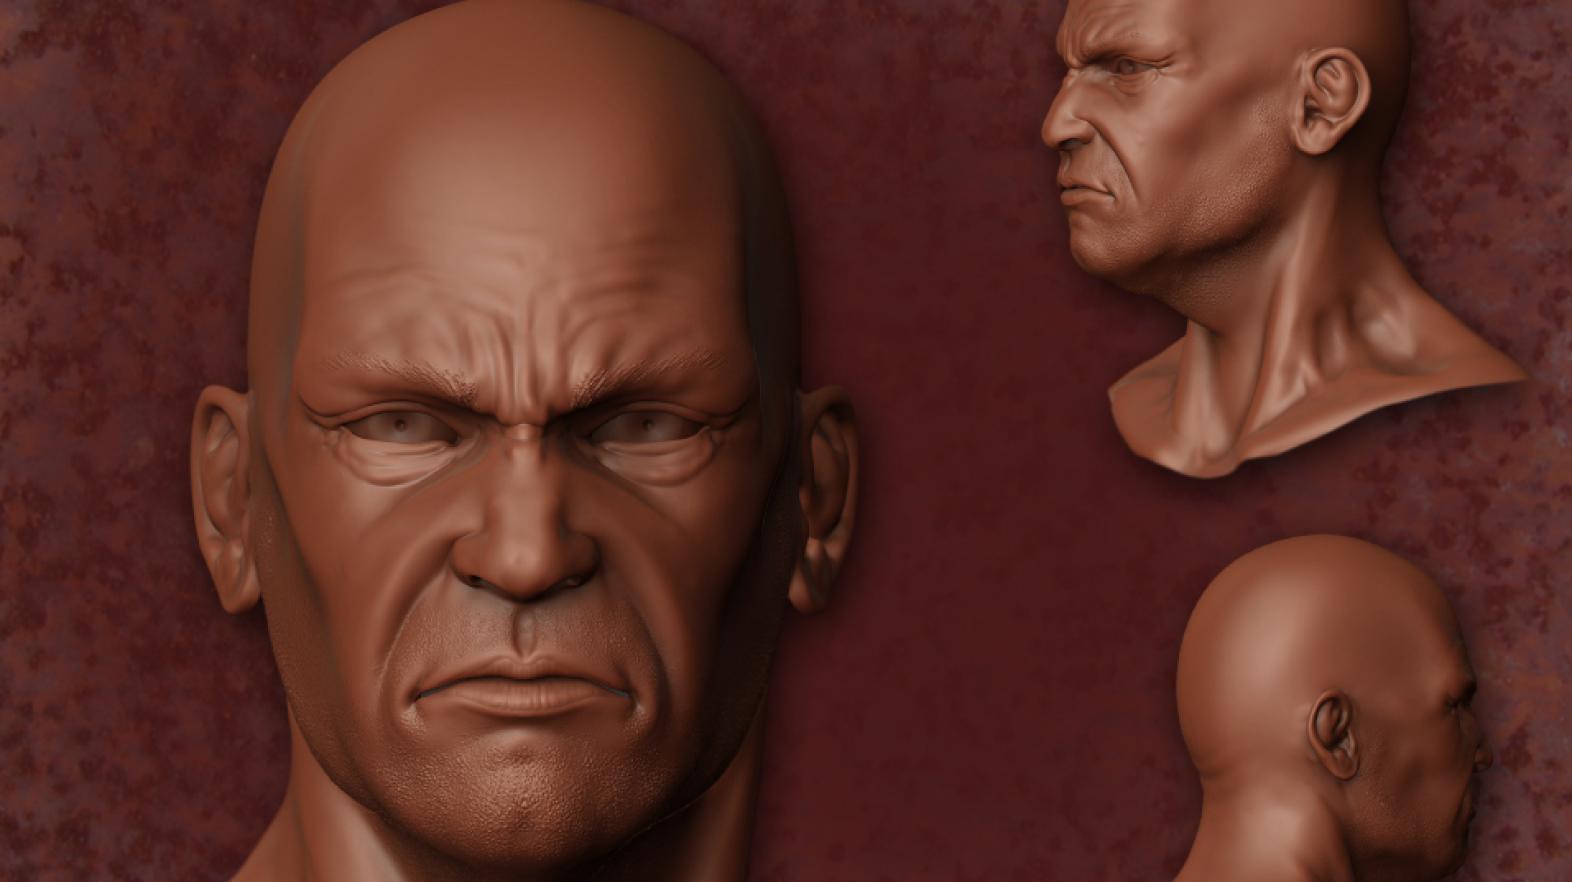 A piece of student work depicting three renderings of a male's angry face.